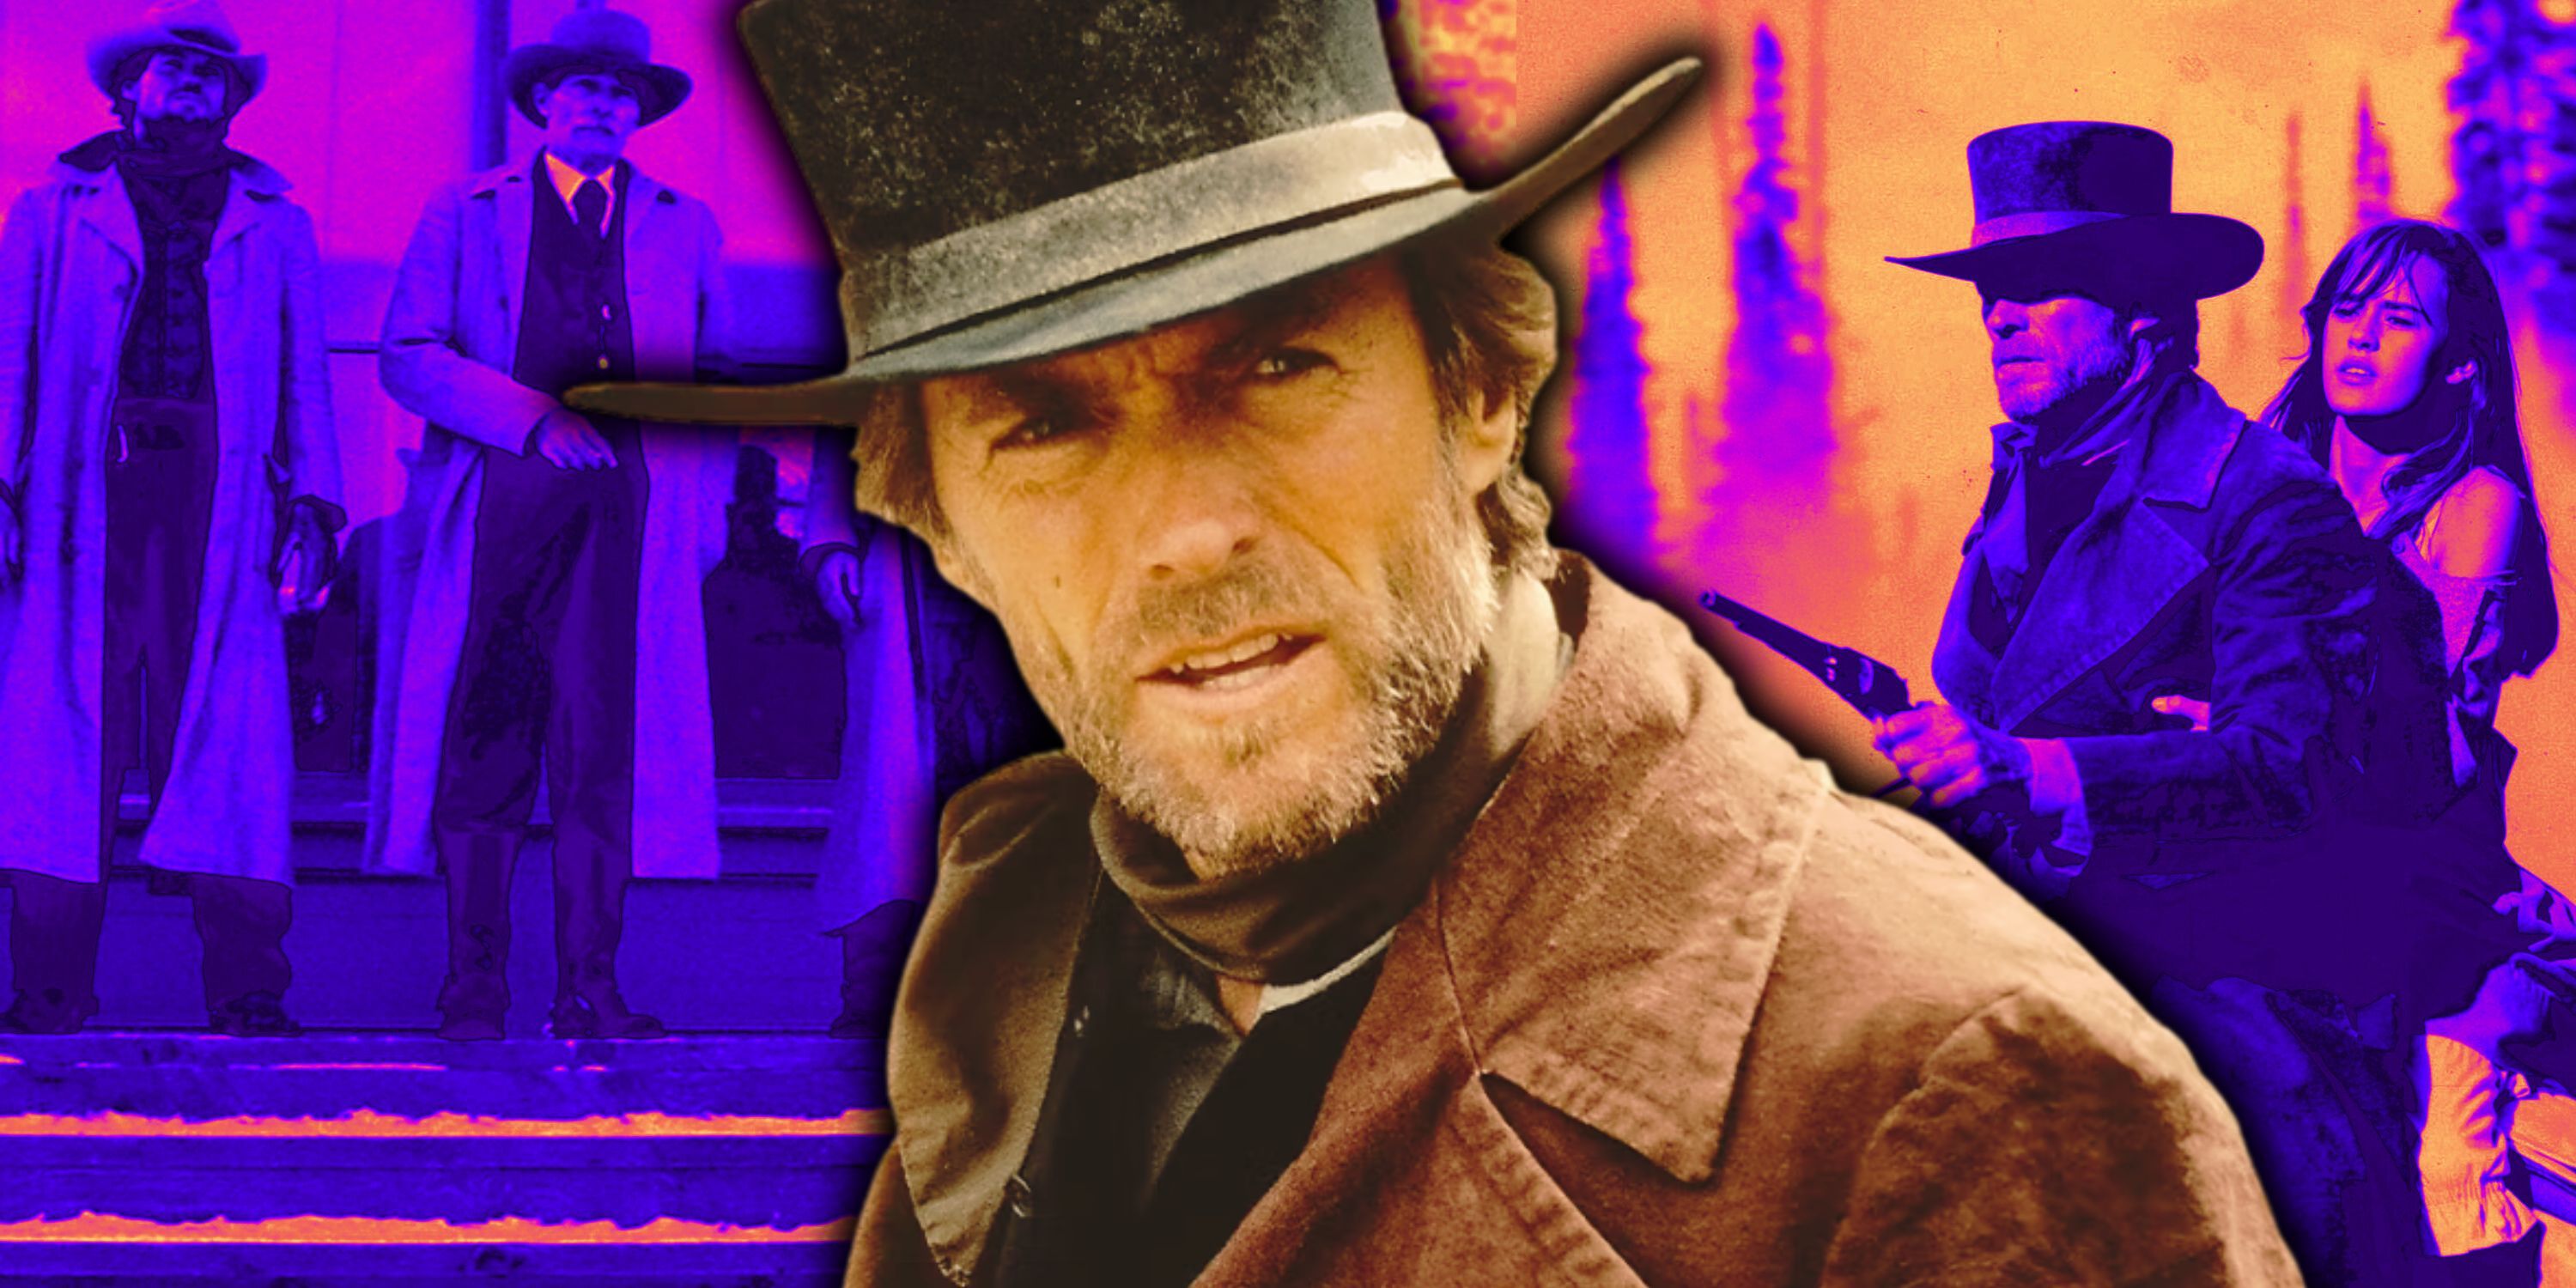 Composite image scenes from Clint Eastwood's Pale Rider